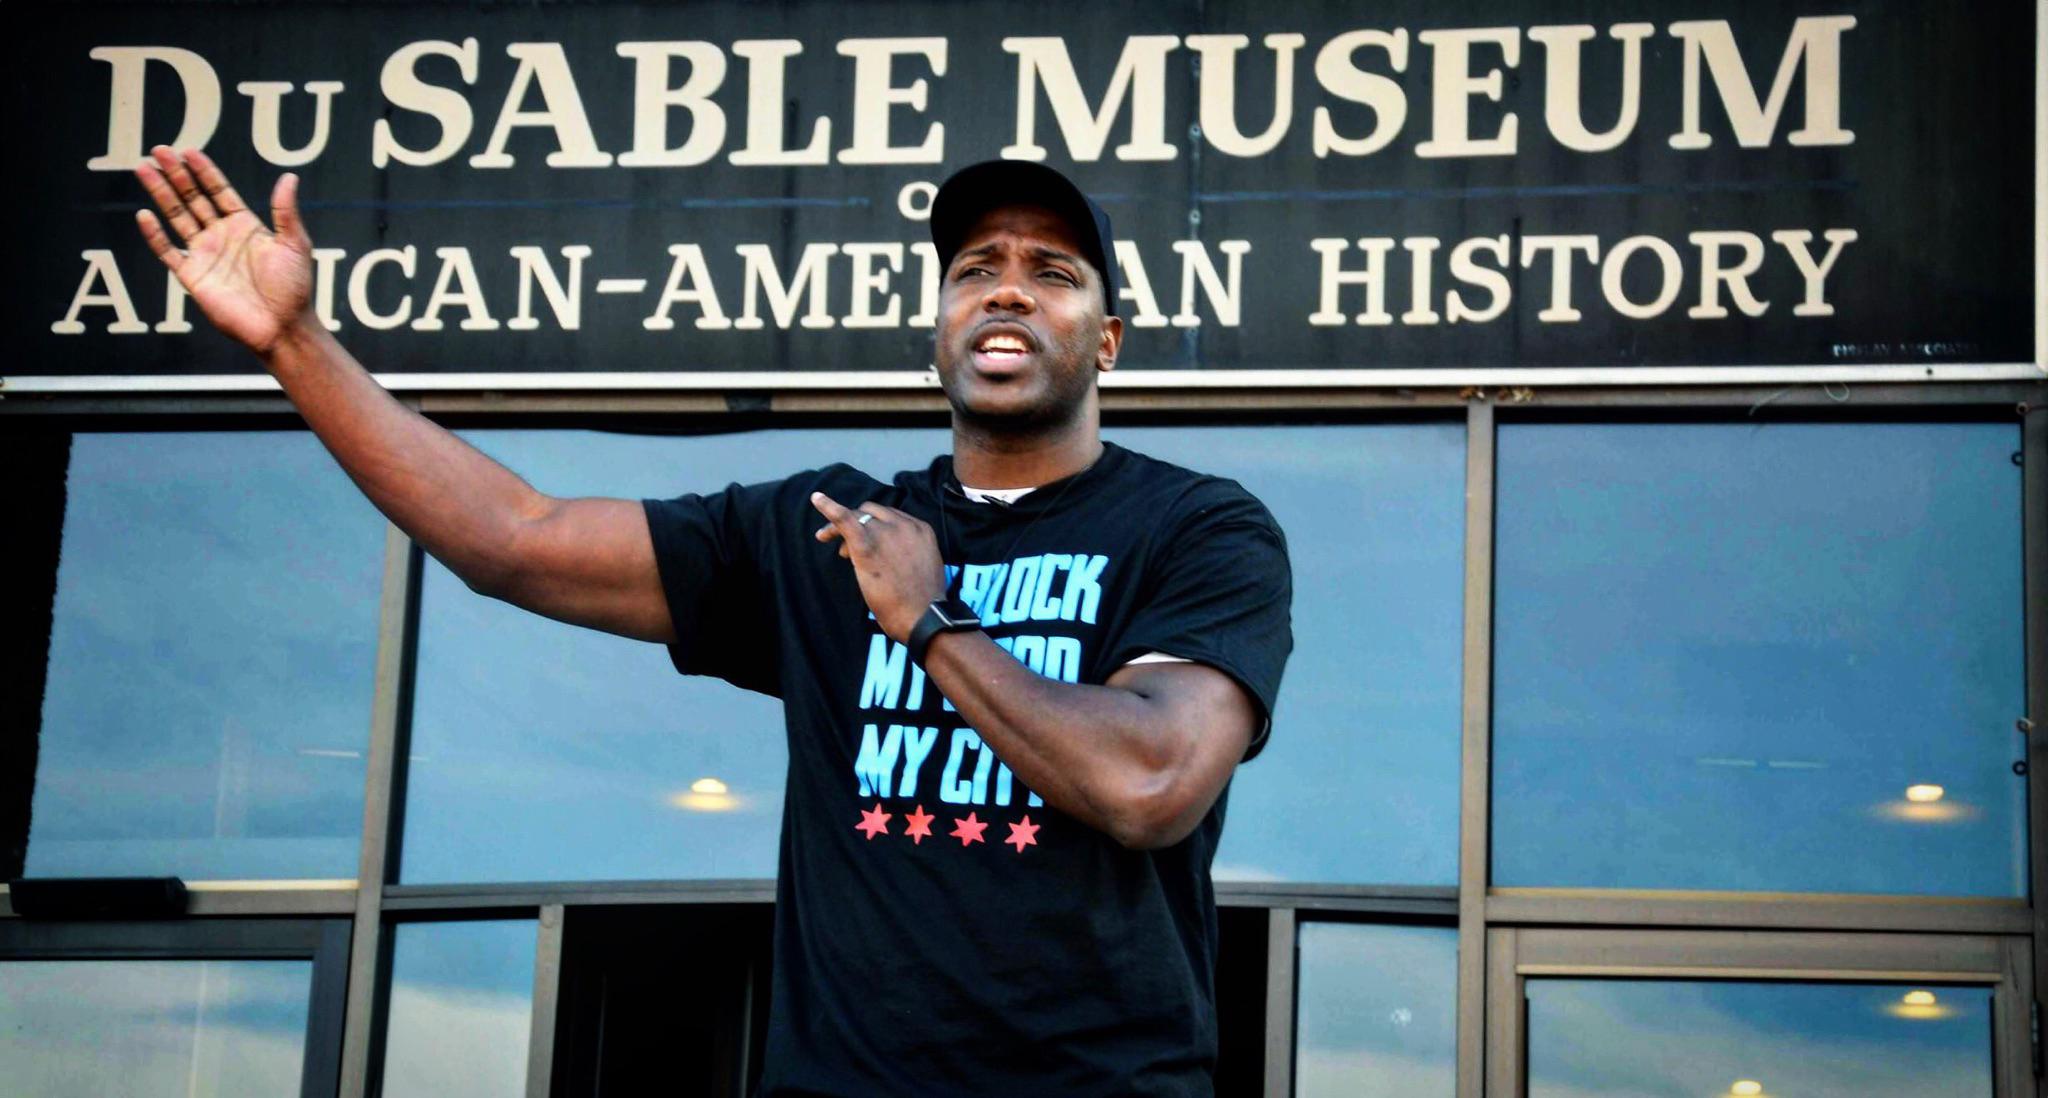 Jahmal Cole speaks at the DuSable Museum of African-American History in February. More than 400 people showed up to learn about his organization. Cole was expecting 100. (Courtesy of Jahmal Cole)